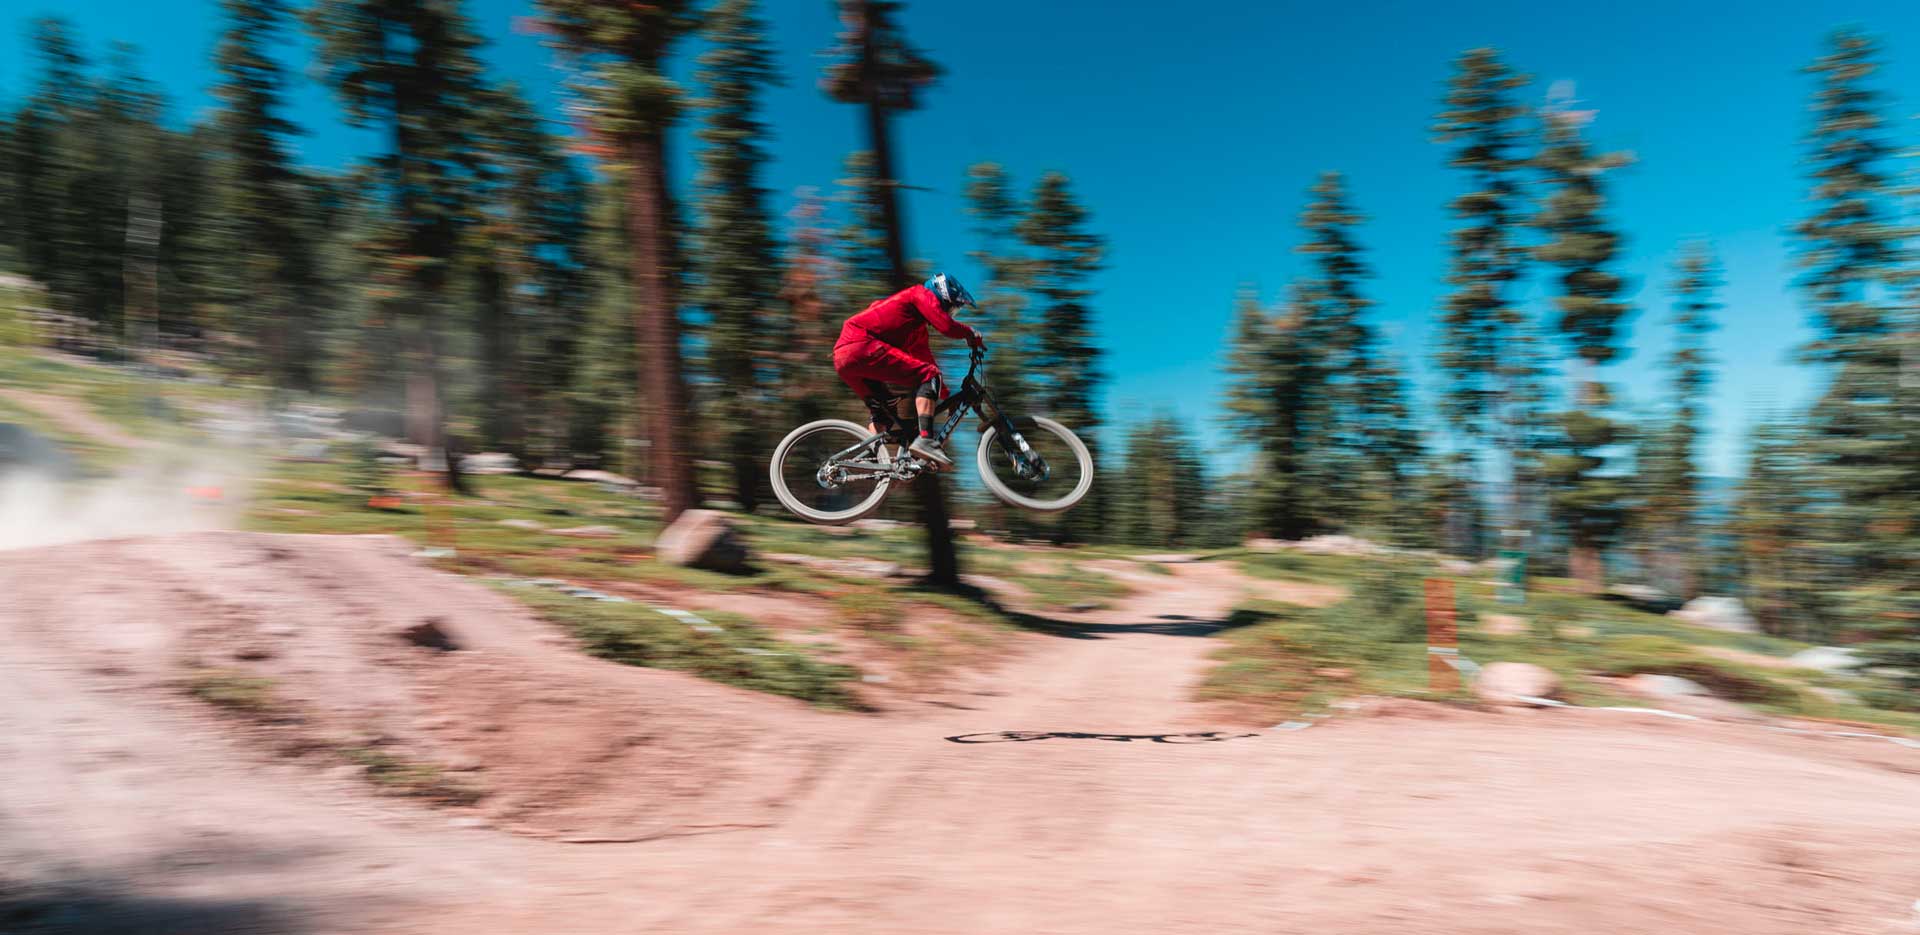 Mitt kader Ouderling Bike Park Review Tour - Northstar at Tahoe: See where this park stacks up